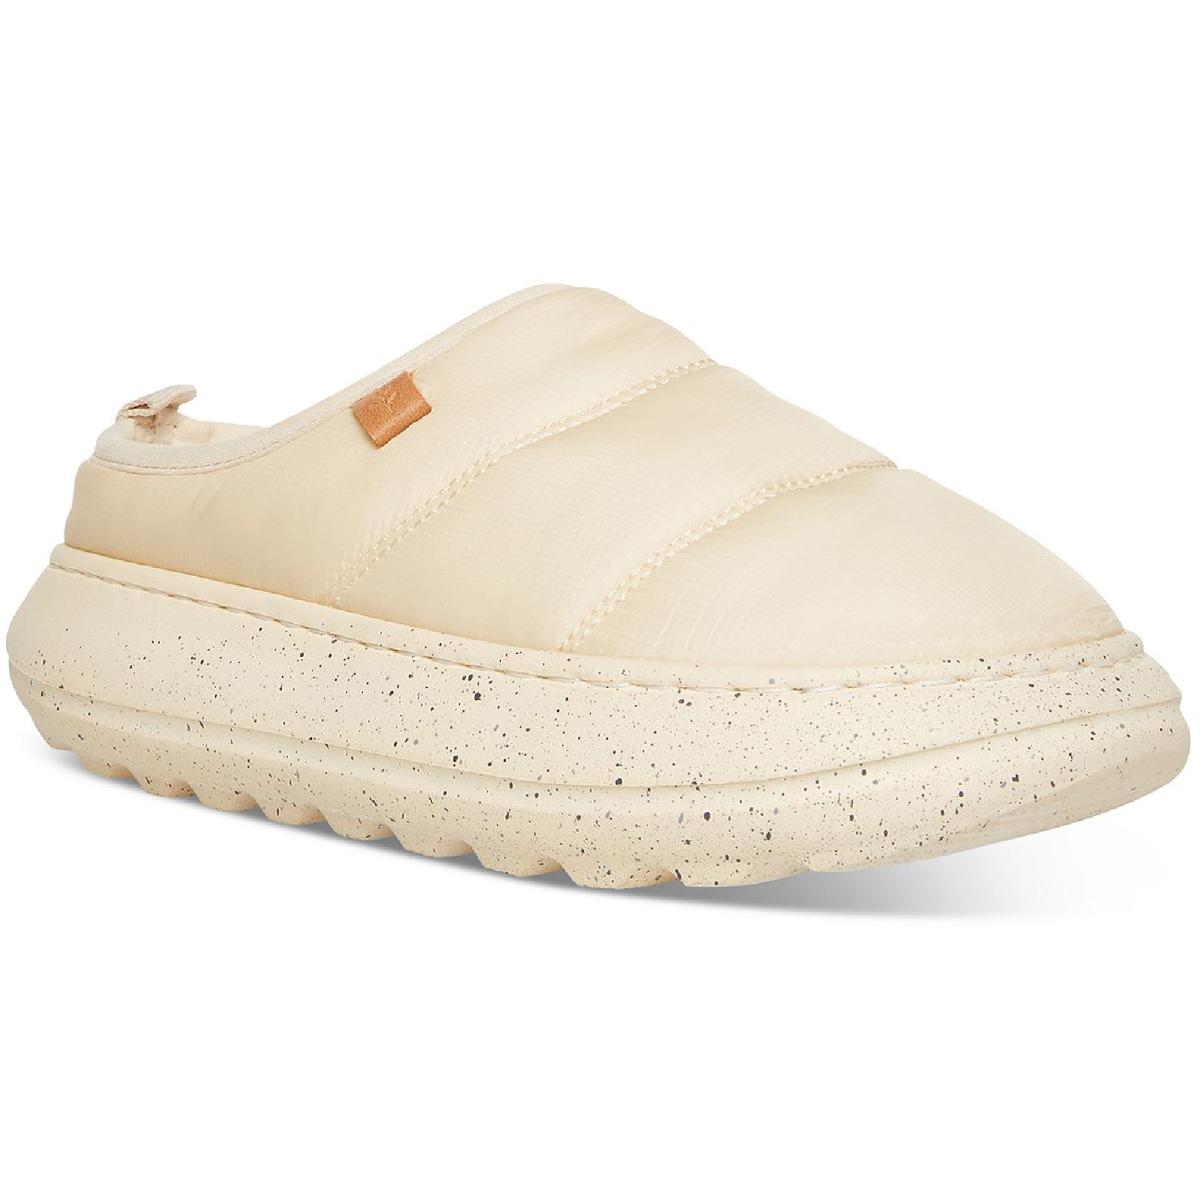 Cool Planet by Steve Madden Birdy Womens Slip-On Quilted Mules